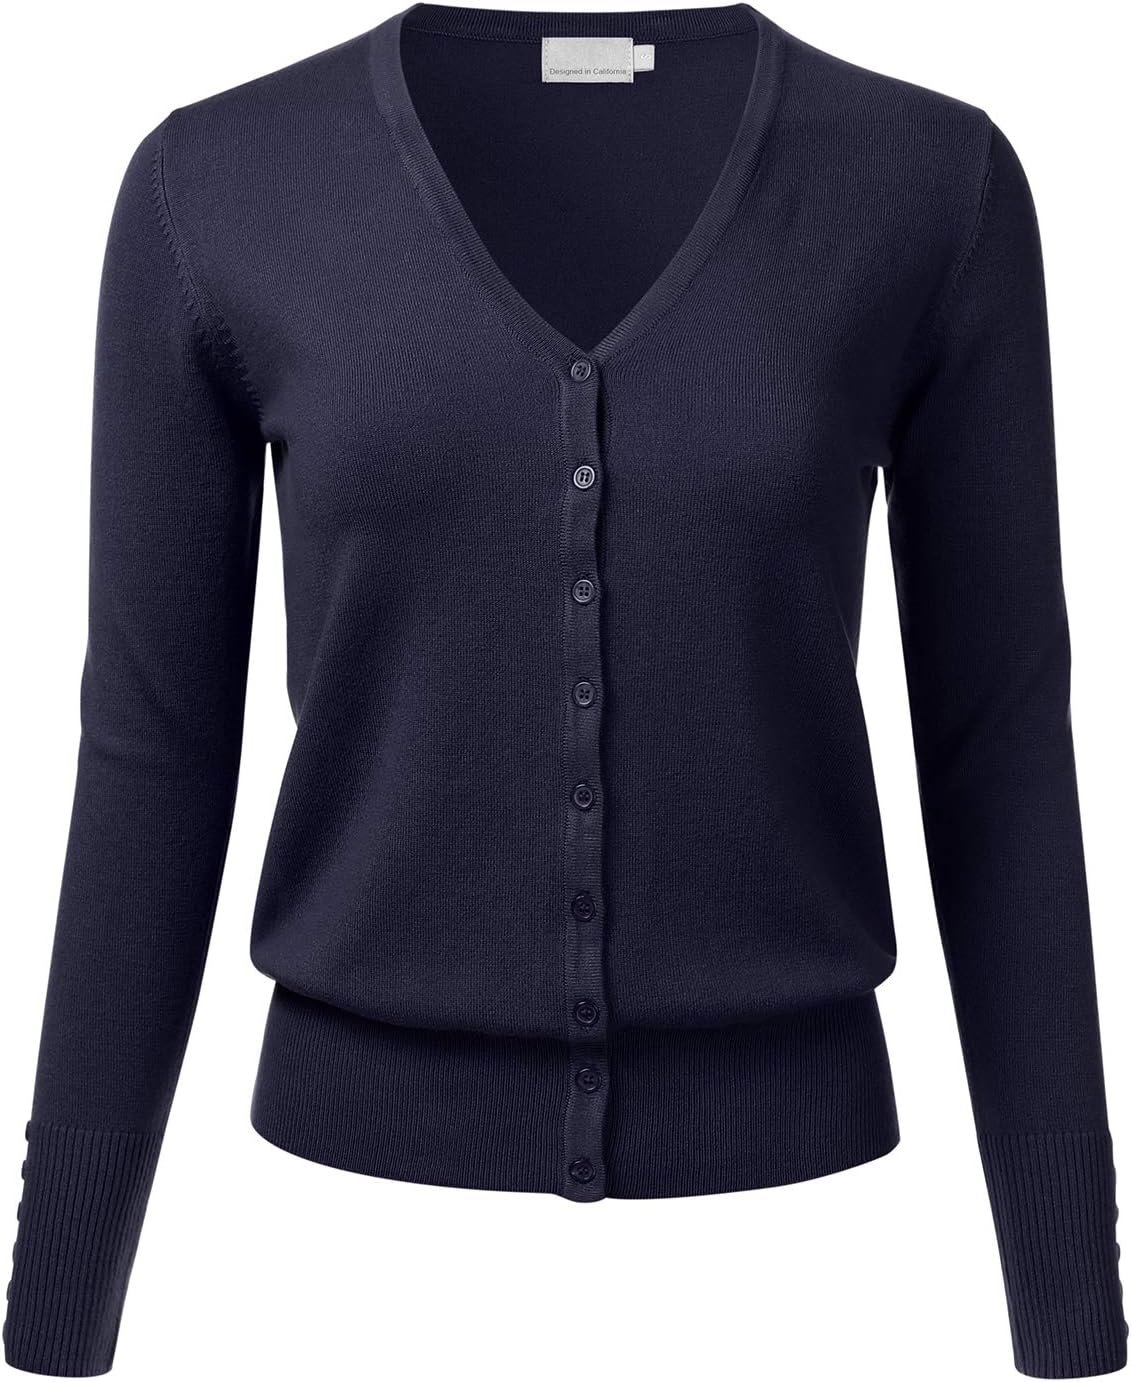 Womens Button Down V-Neck Long Sleeve Knit Cardigan with Sleeve Button Detail (S-3XL)